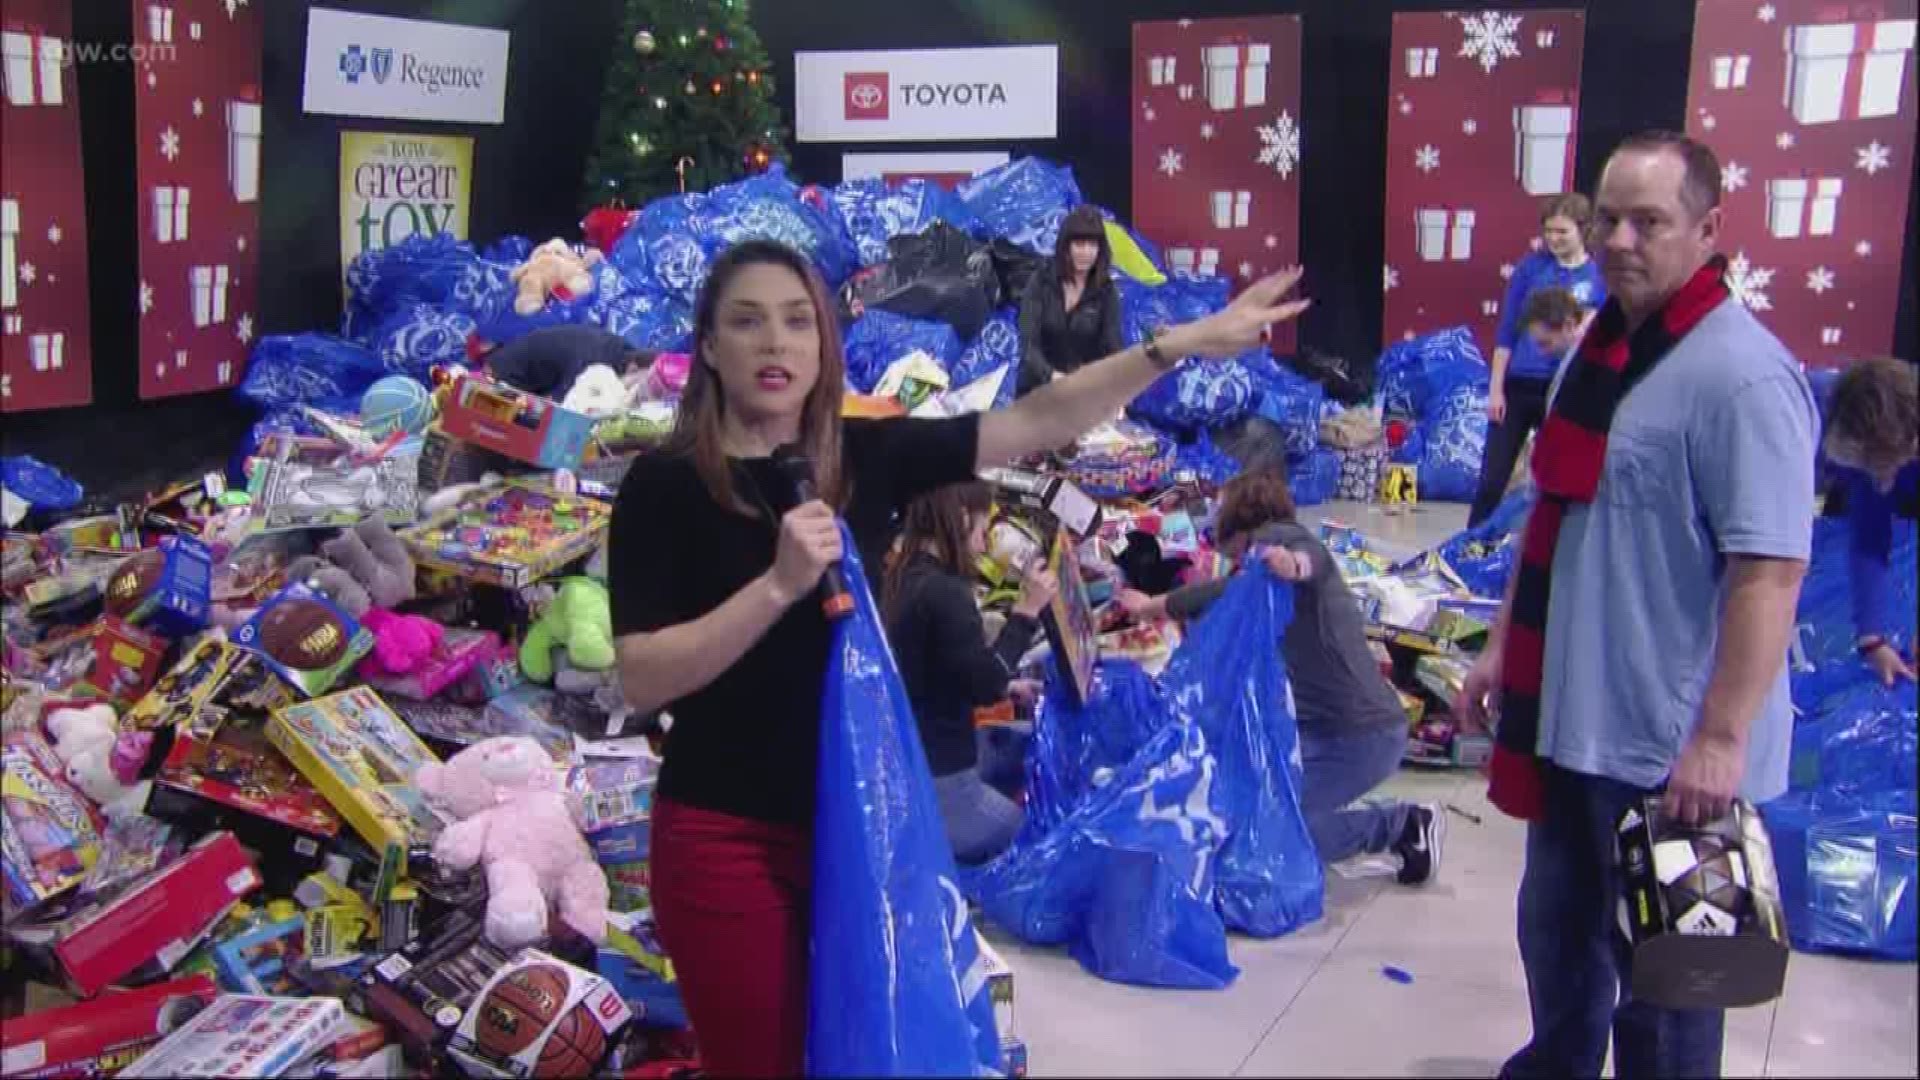 The KGW Great Toy Drive has come to a close, so volunteers spent all day bagging up toys to be delivered to over 100 non-profits in the Portland area.